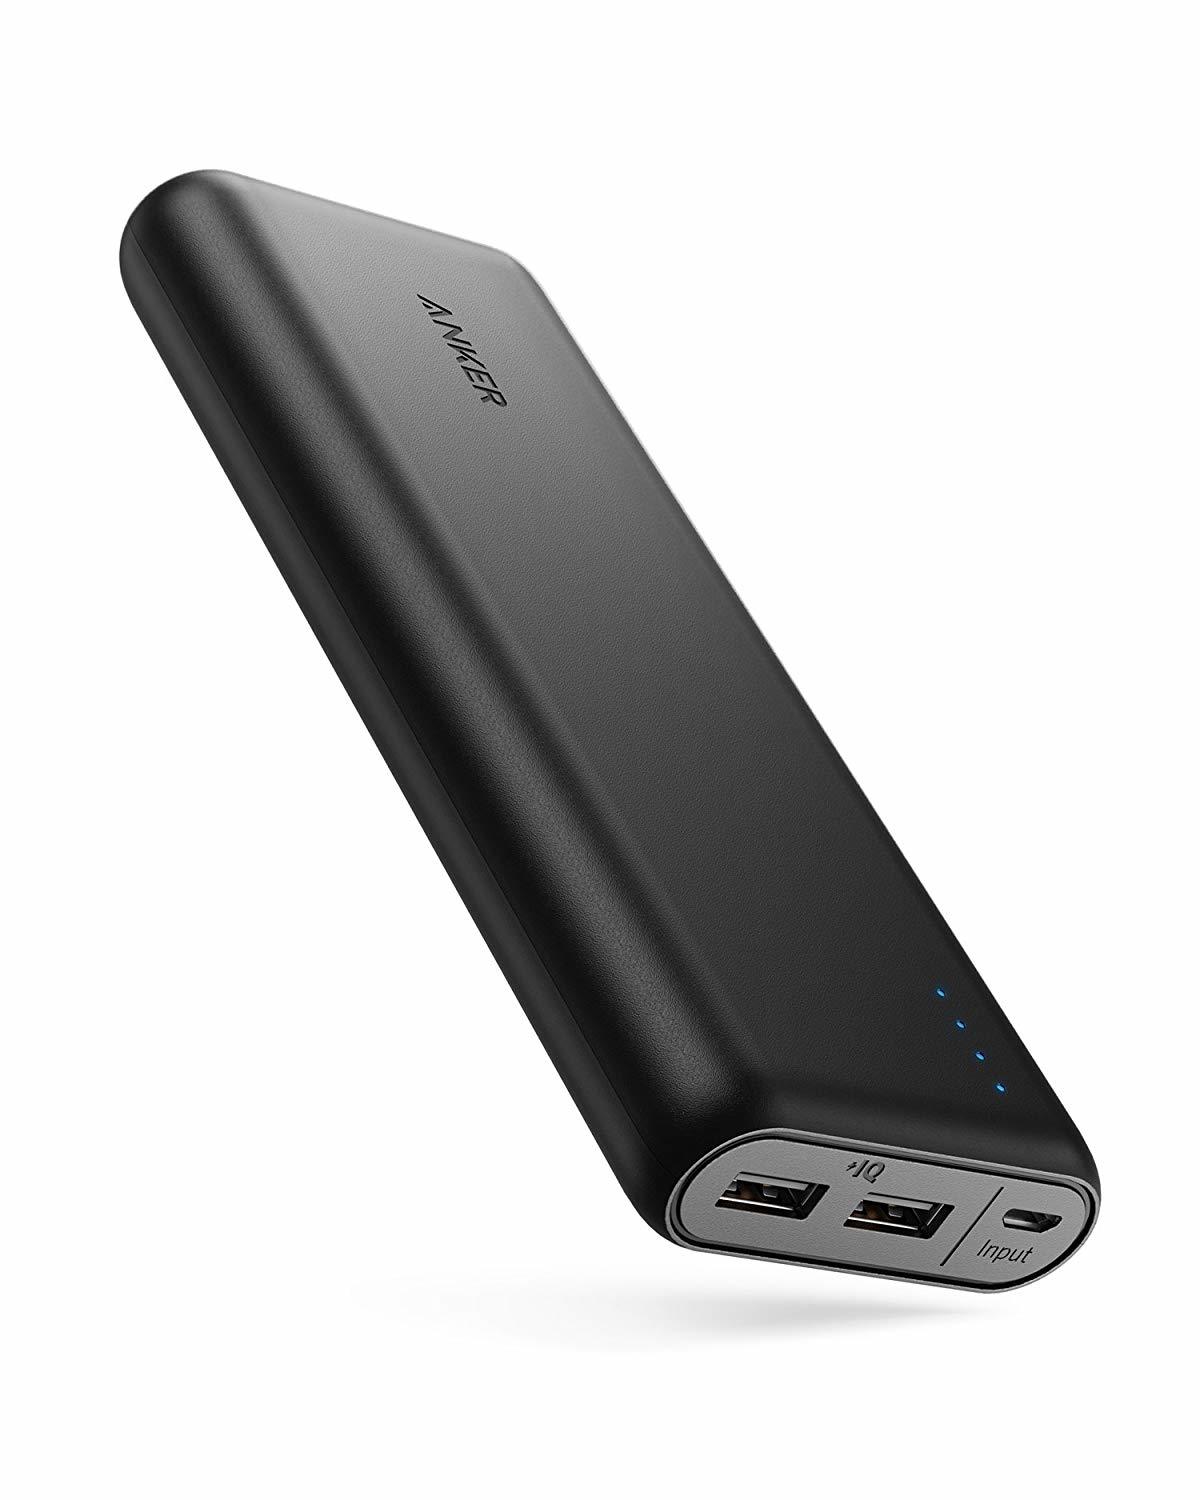 Powerbank - a backpacking travel essential and hostel packing necessity